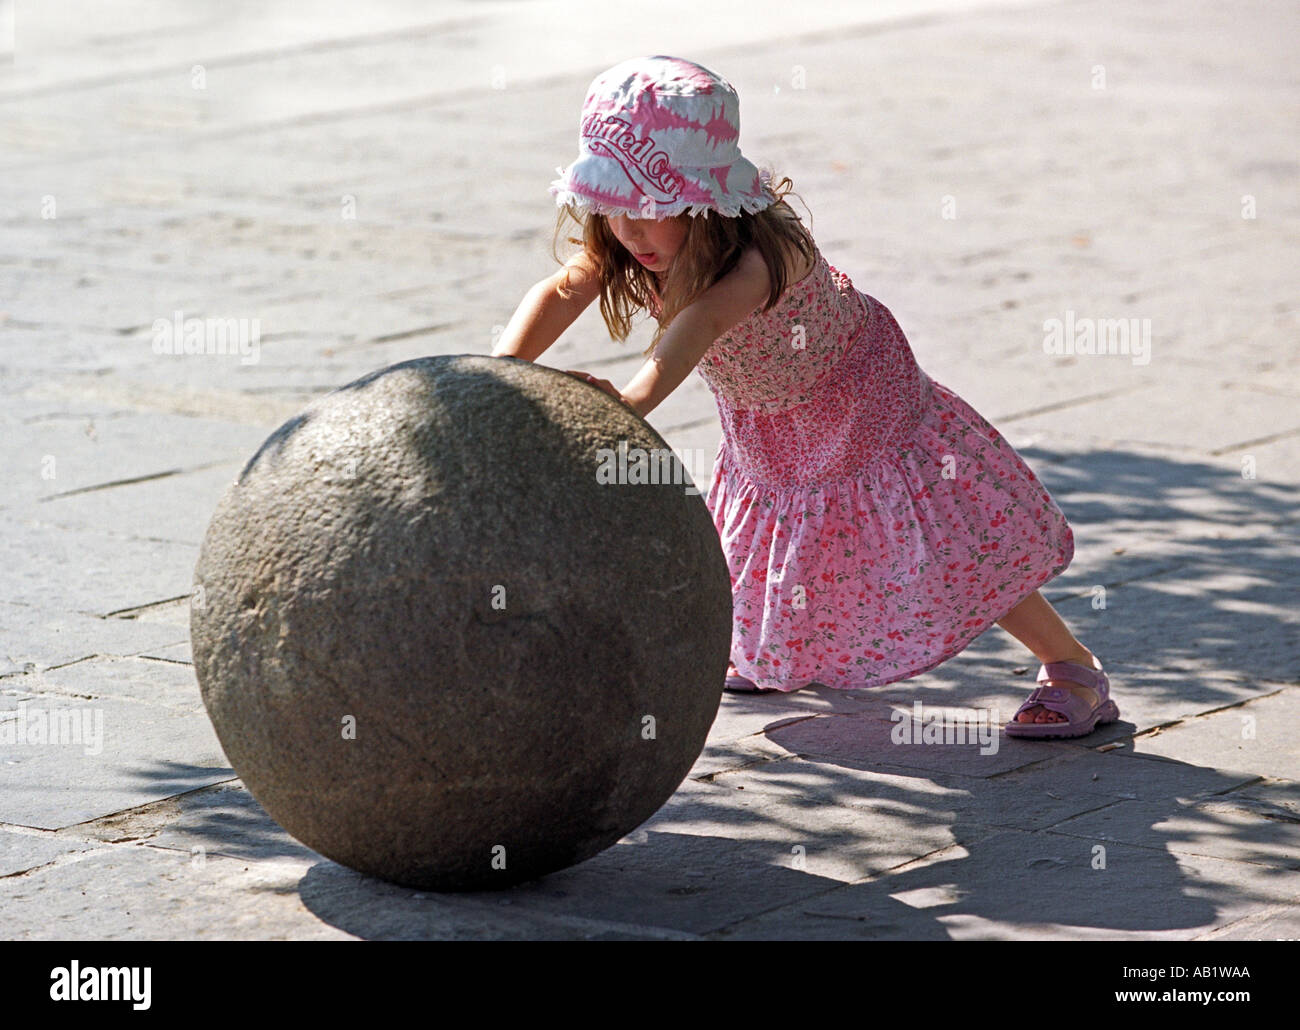 A young girl pushing a large cannonball Stock Photo